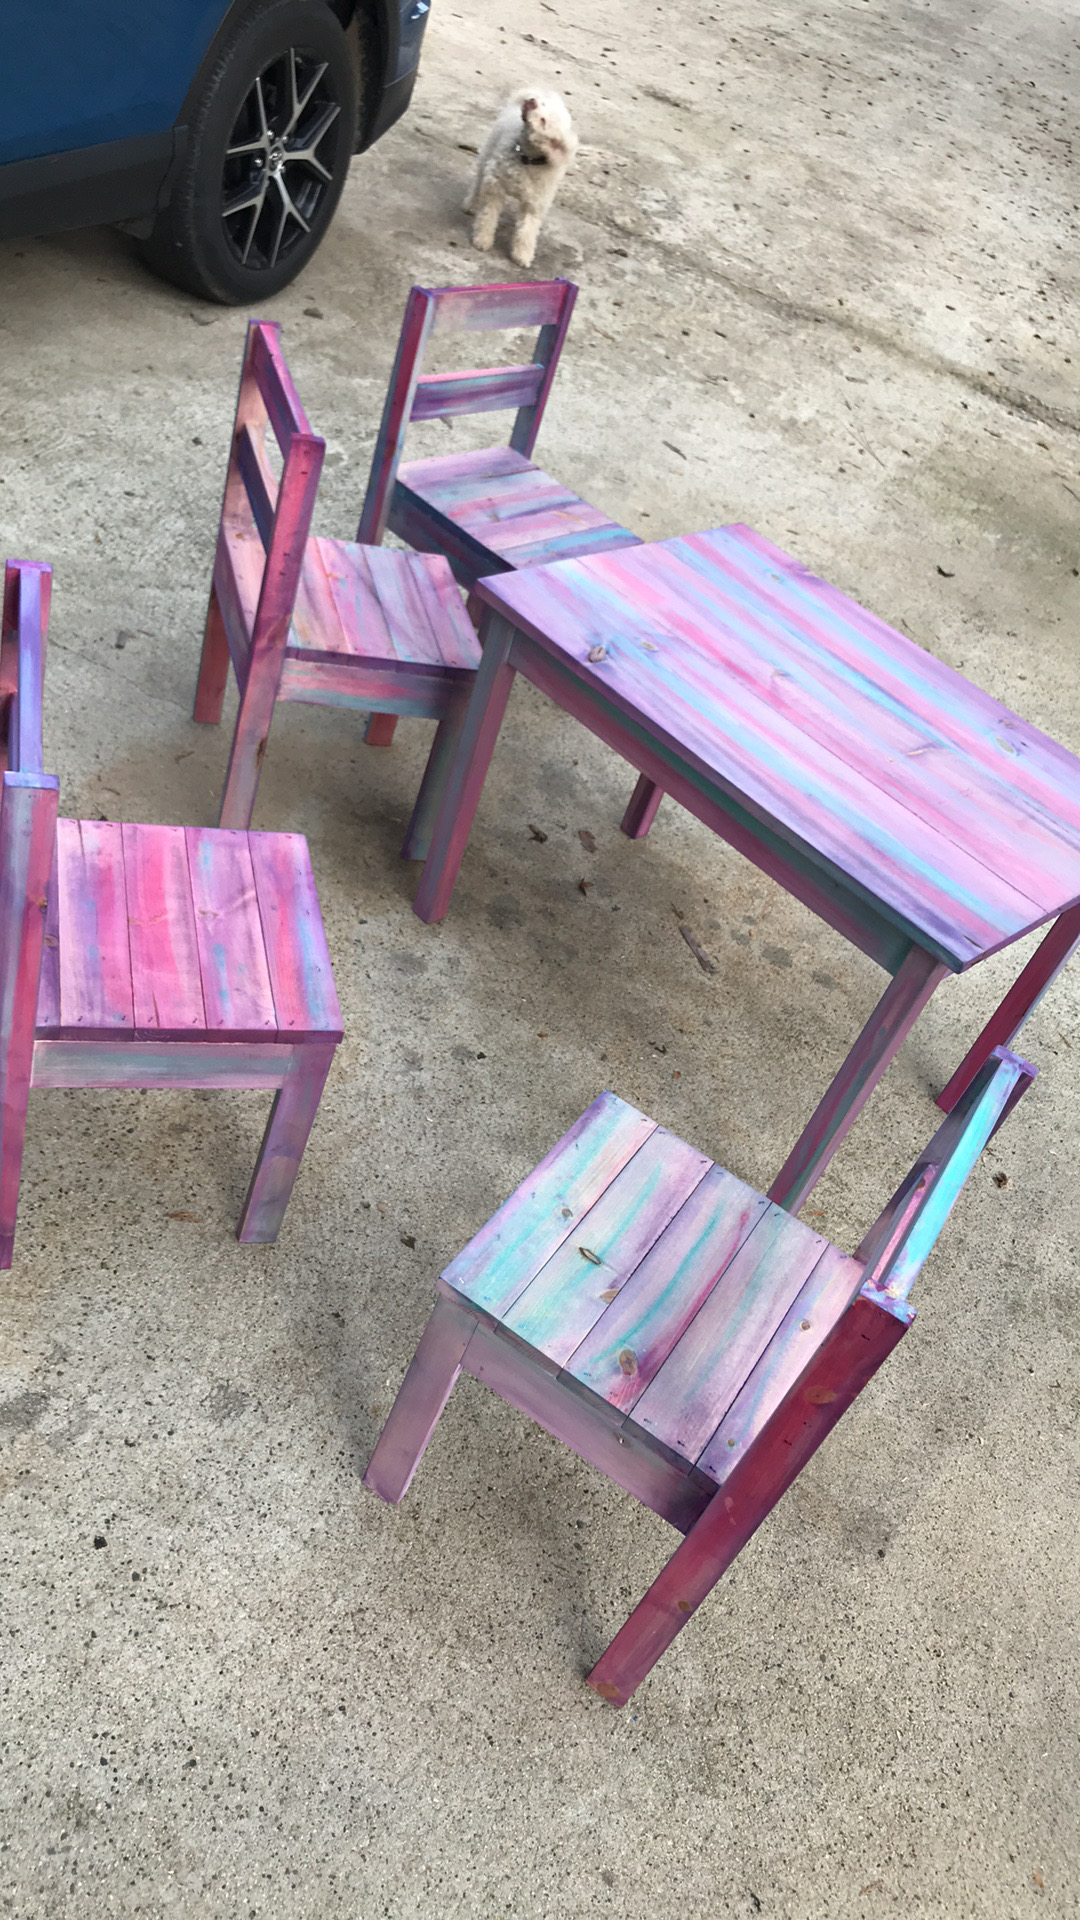 unicorn kids table and chairs